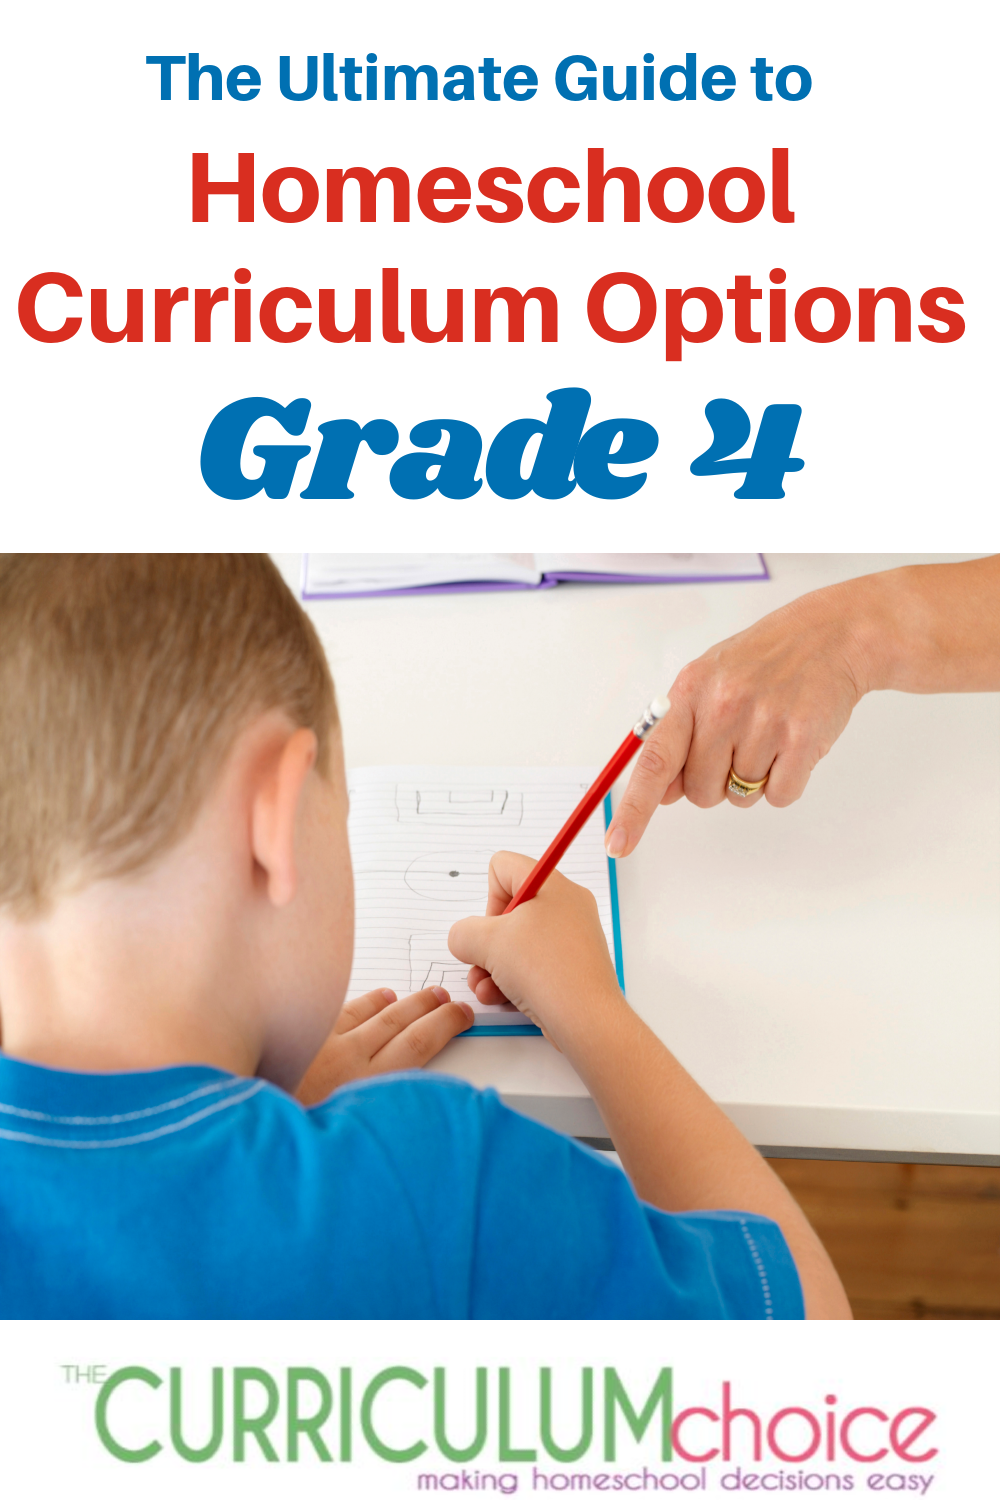 The Ultimate Guide to Homeschool Curriculum Options Grade 4 is your go-to reference for full curriculum options, curriculum for individual subjects, as well as ideas for extras such as piano and art for 4th grade!